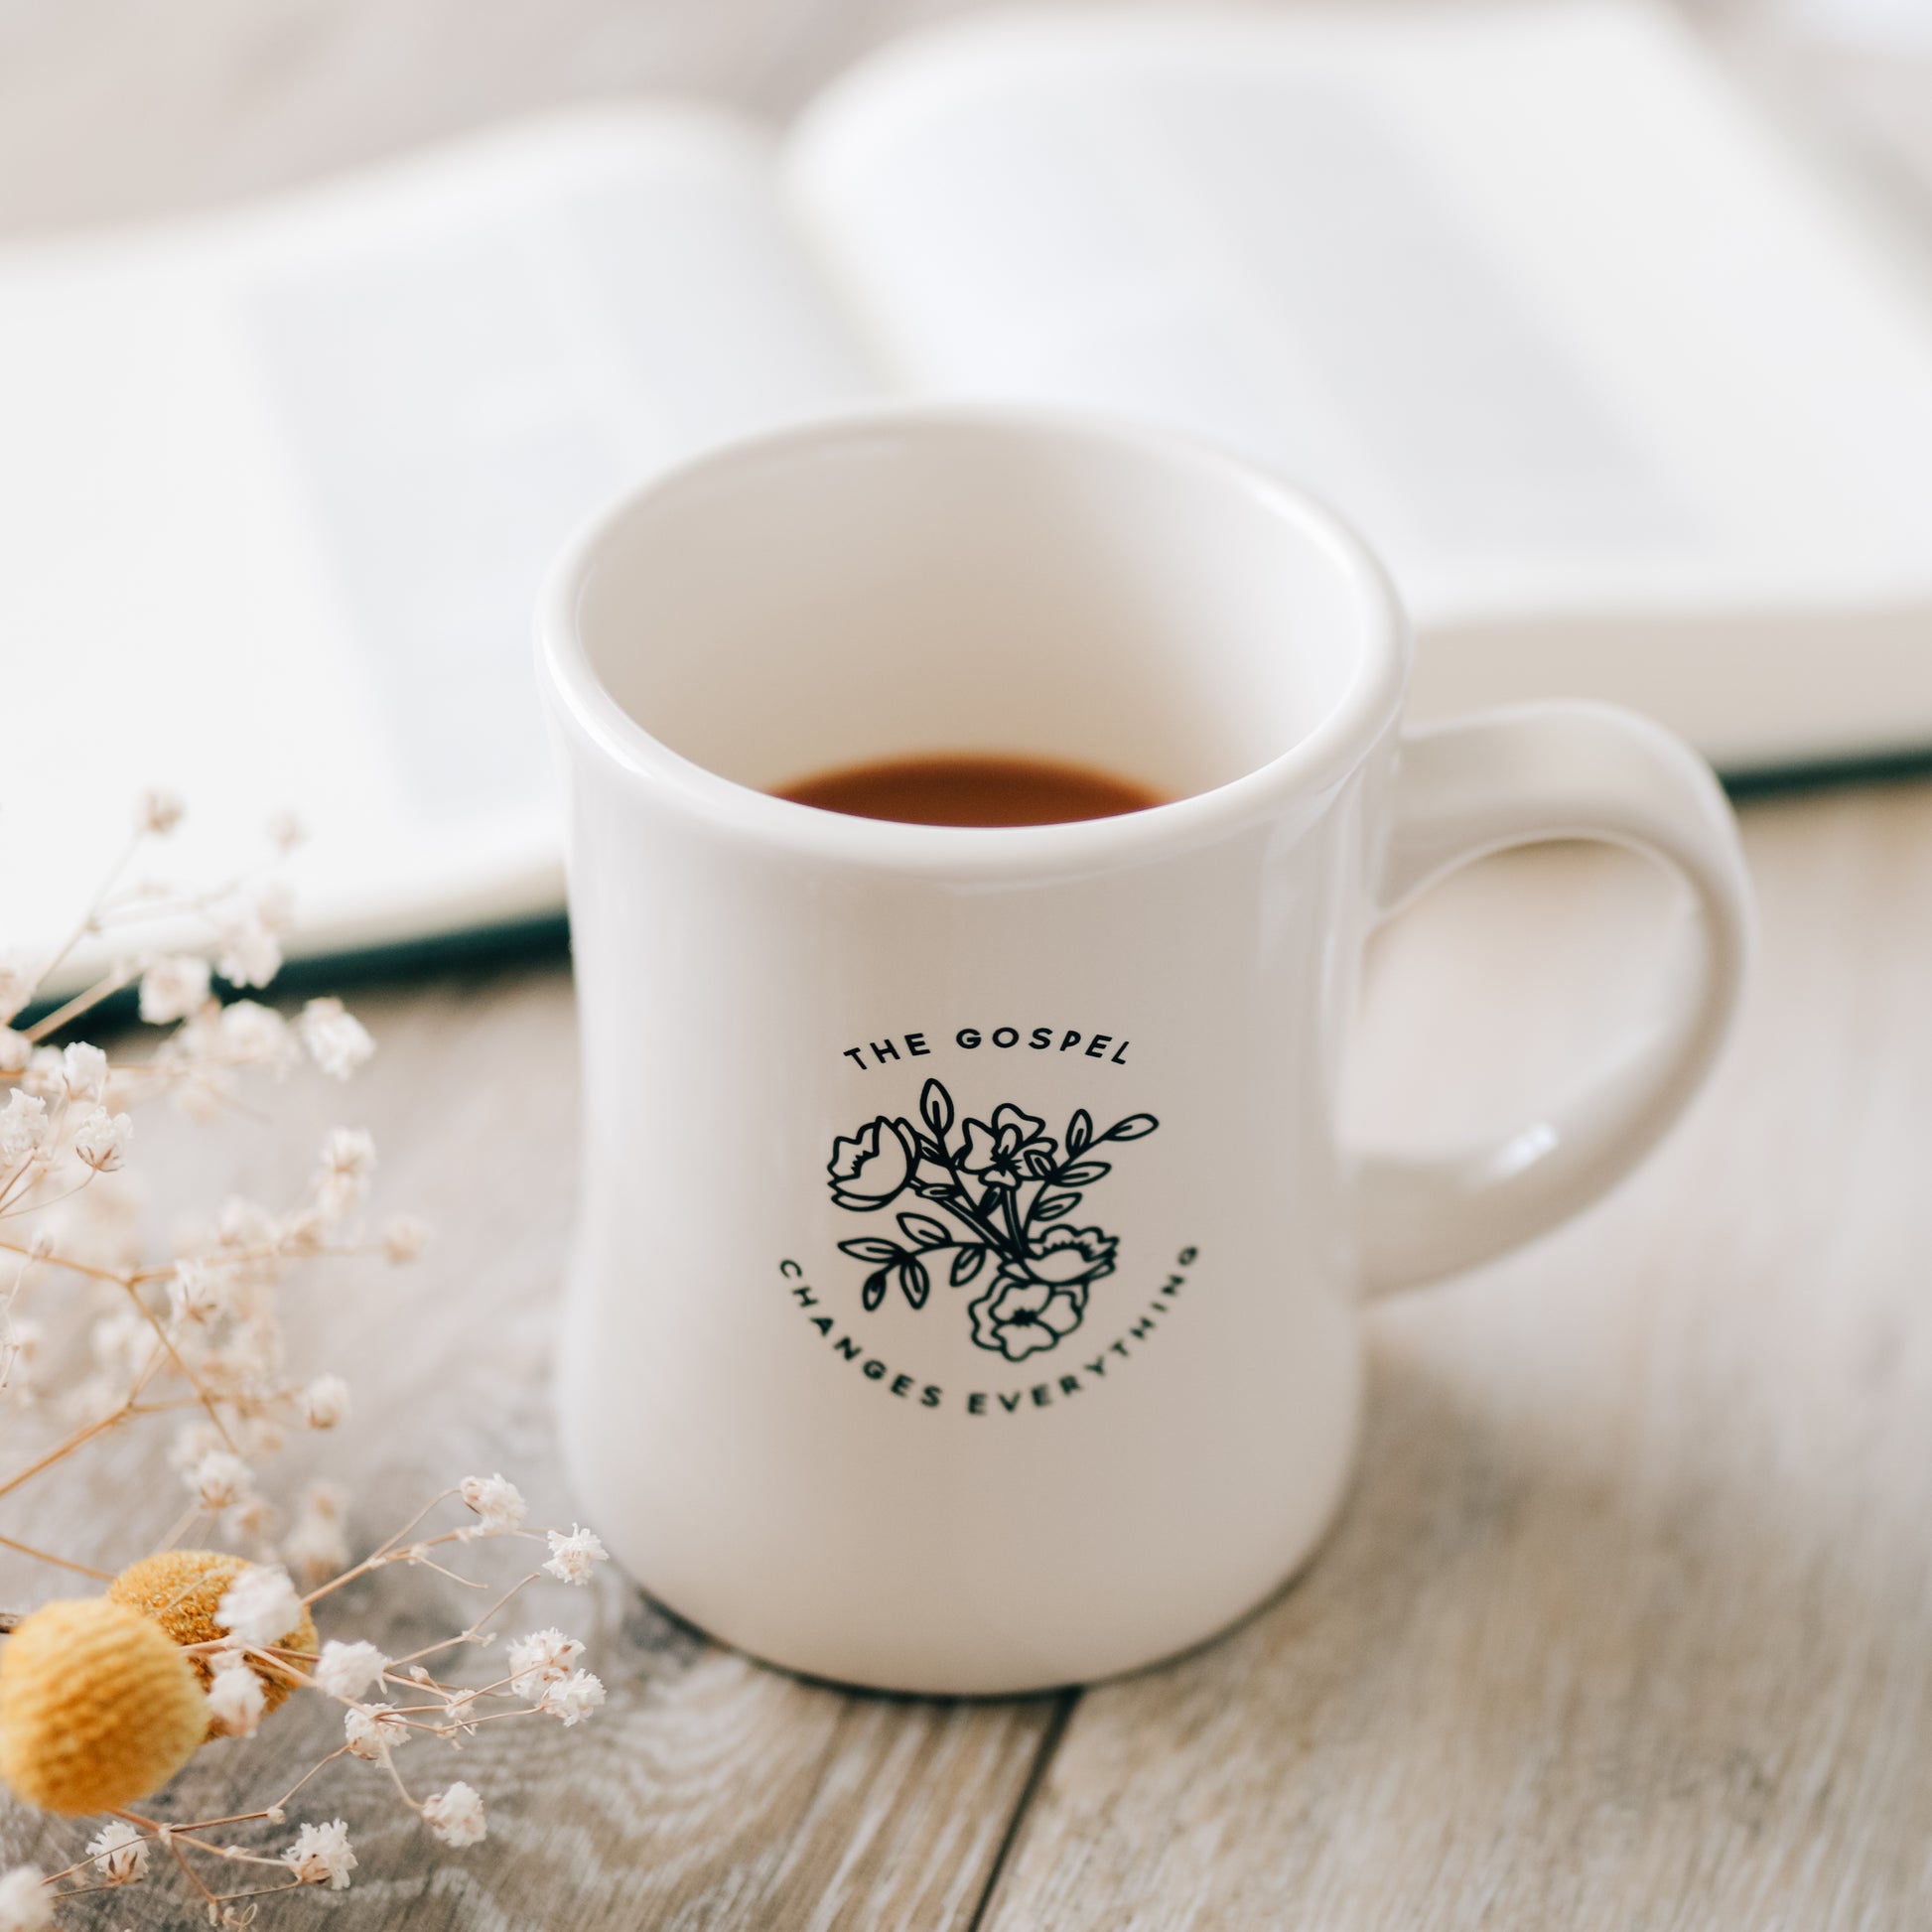 The Coffee Lover's Bible: Change Your Coffee, Change Your Life